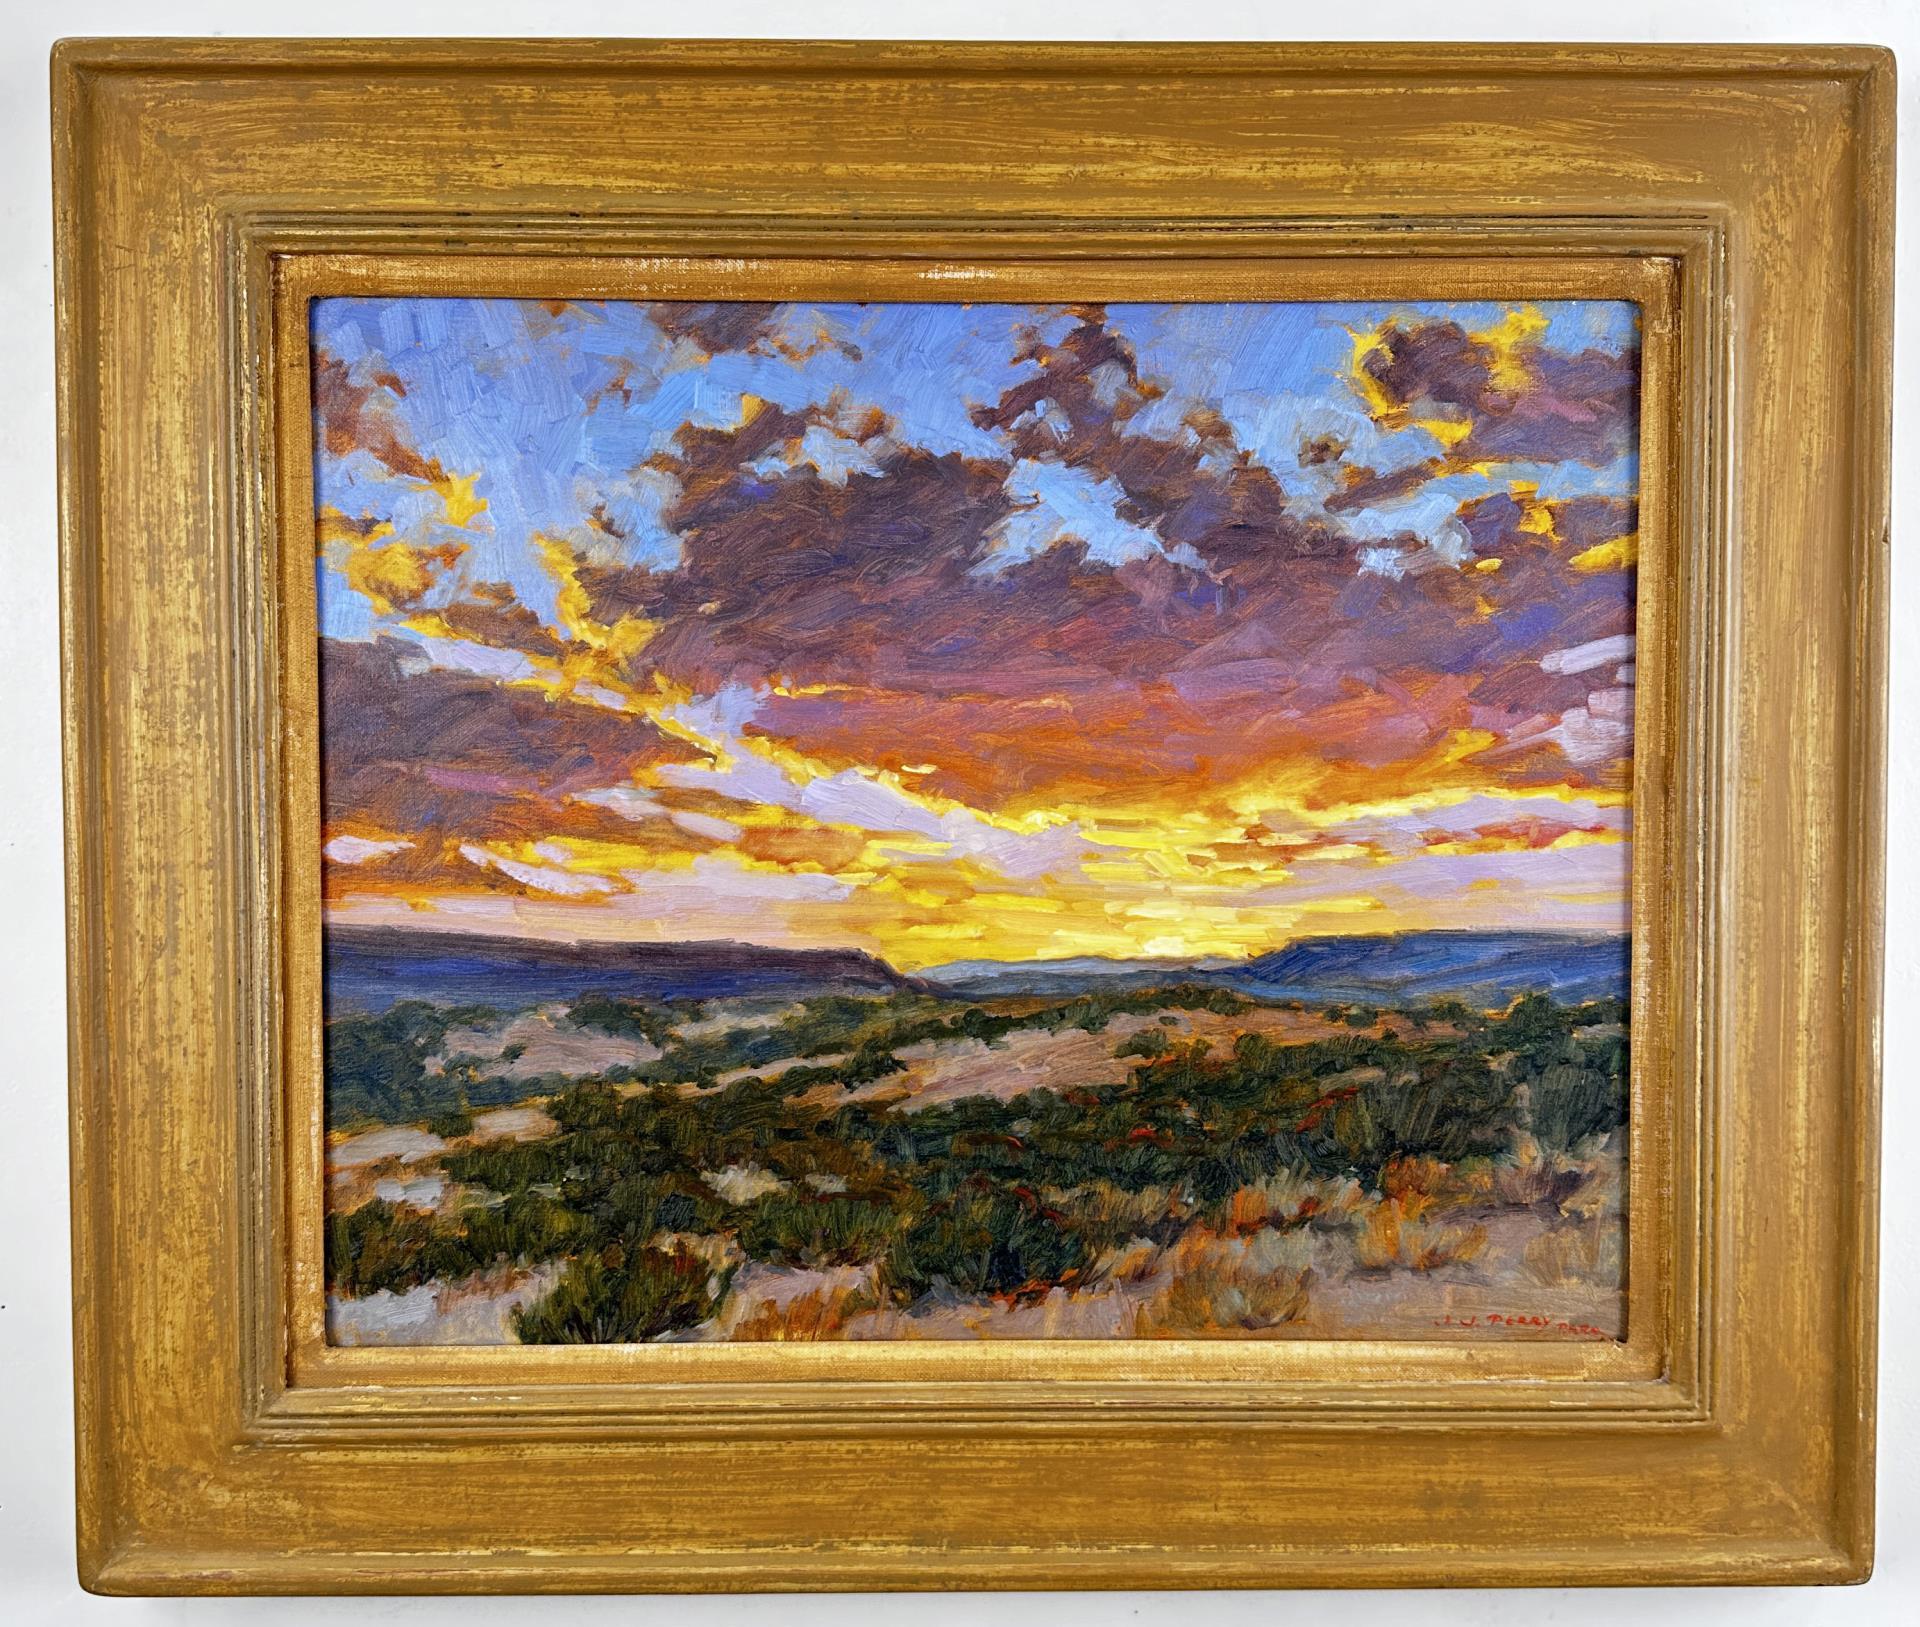 Jean J Perry Oil on Canvas Colorado Painting